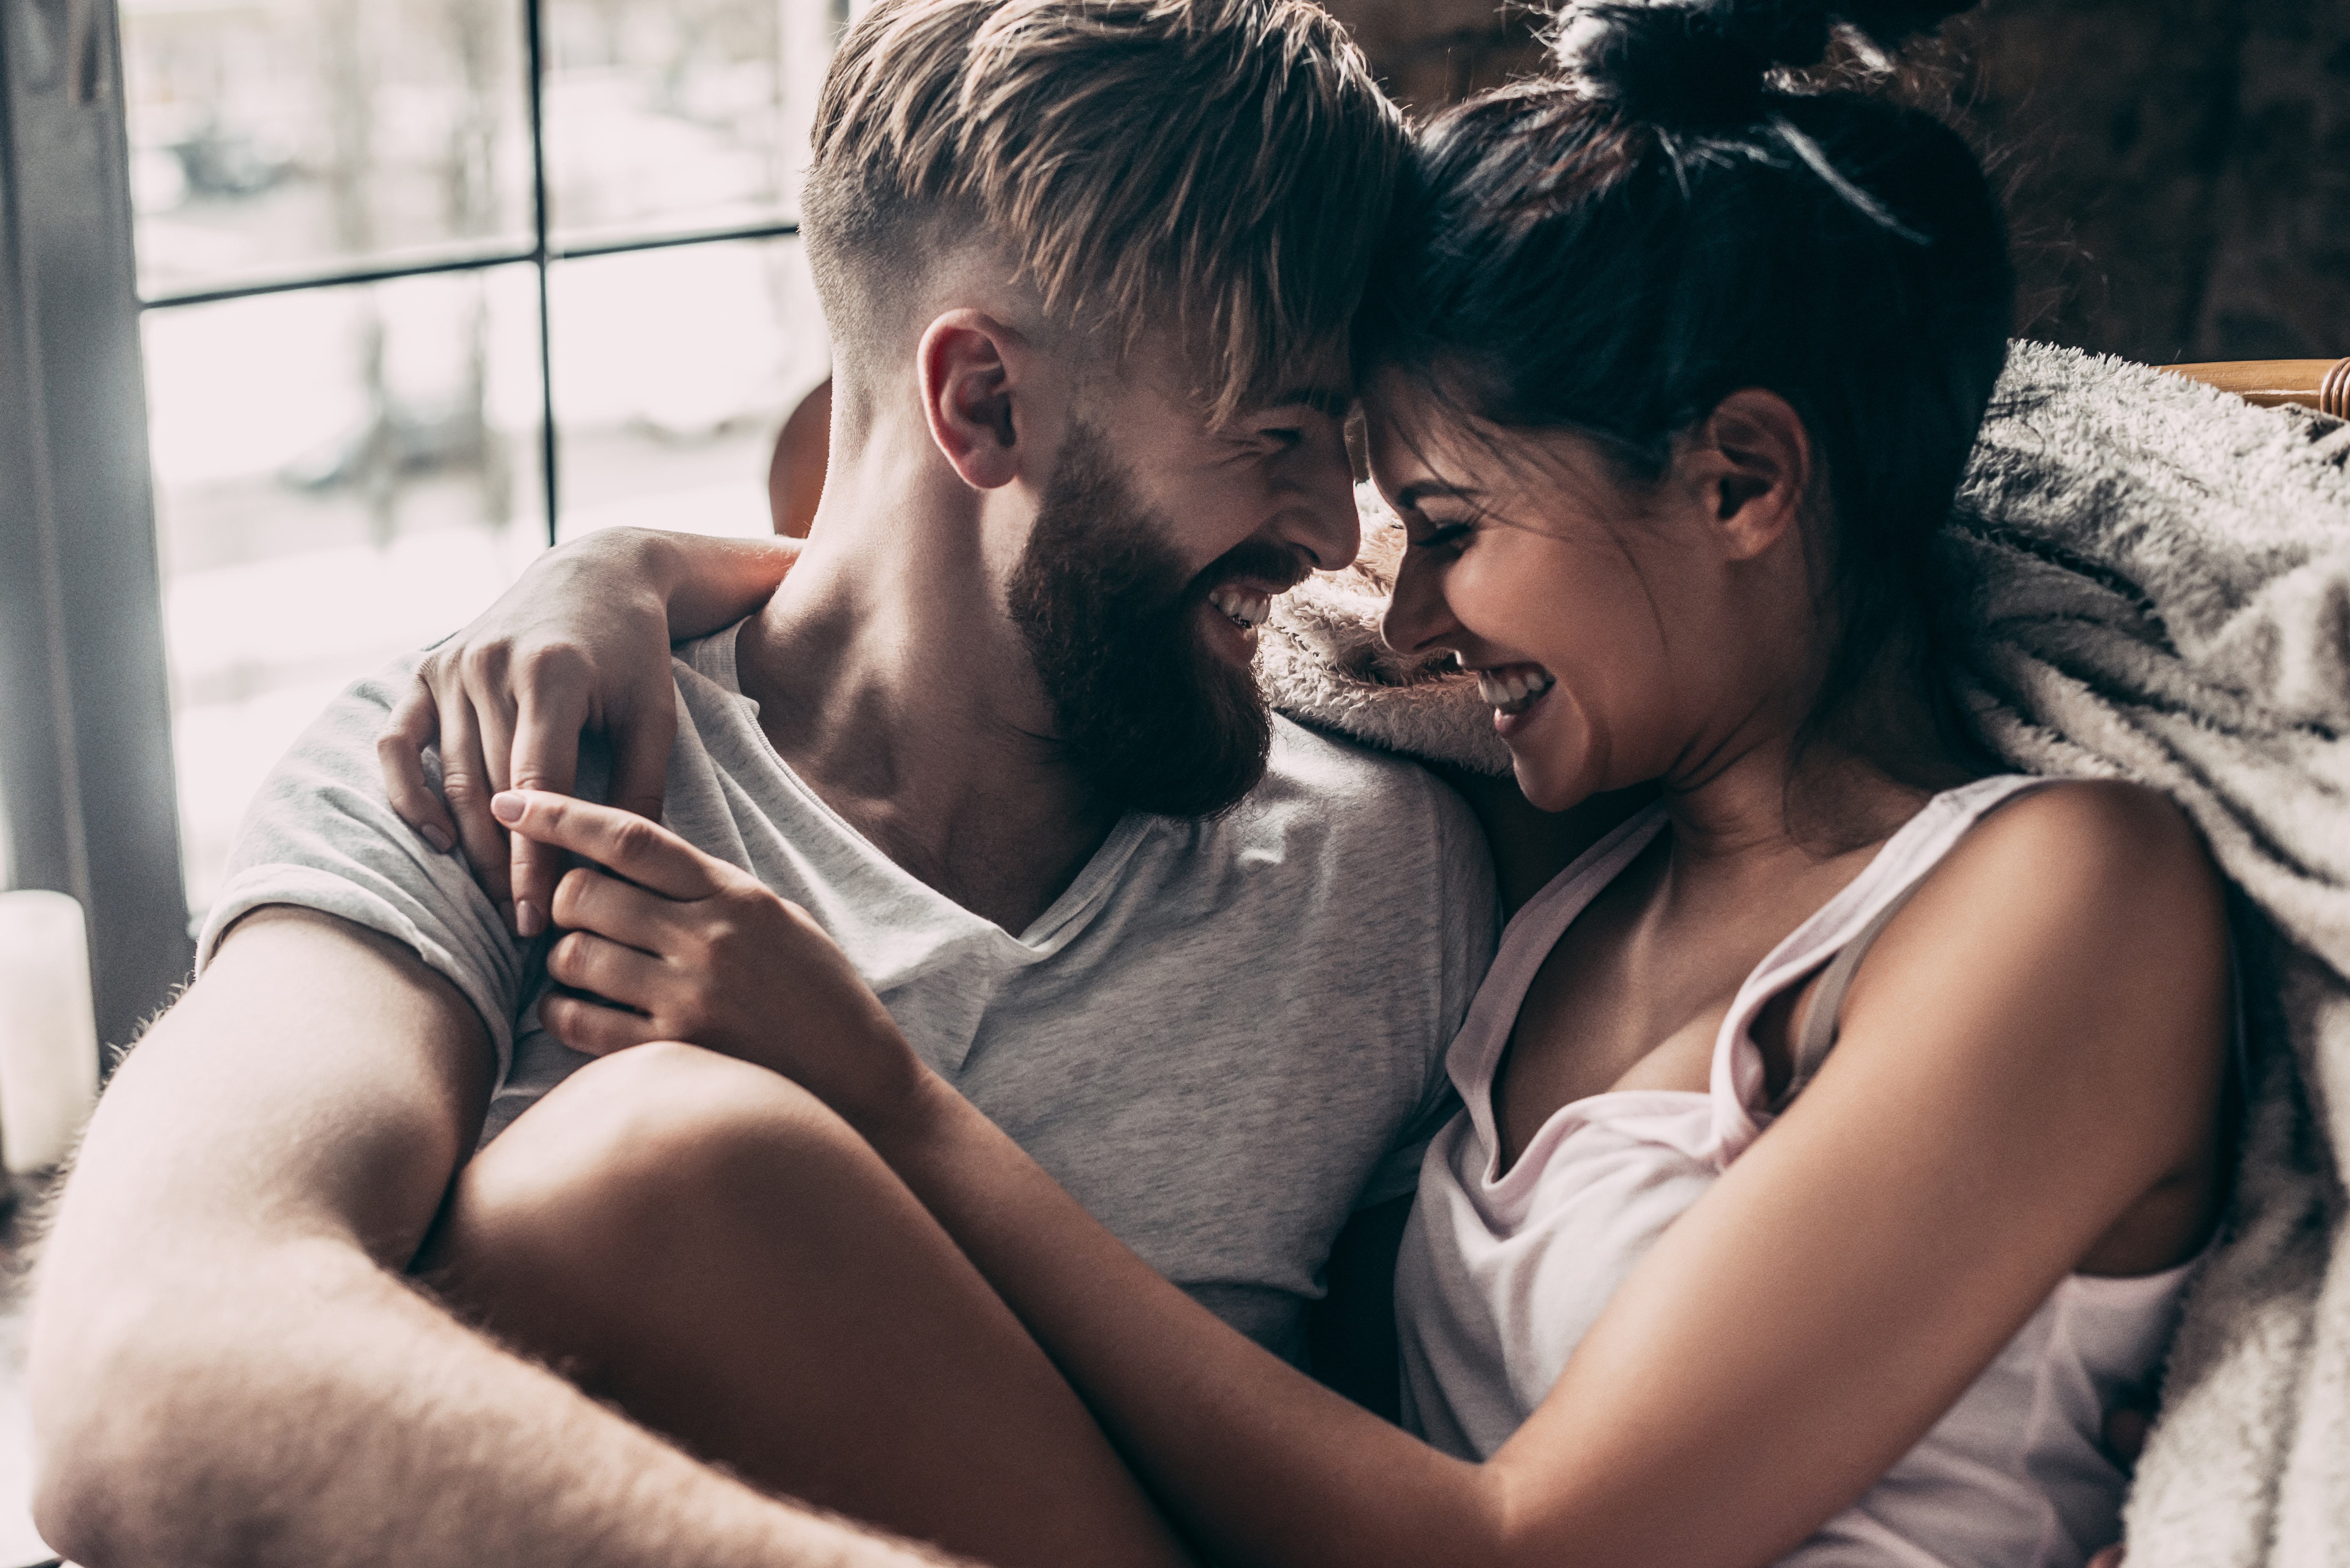 Cannabis Use Leads to Greater Sex Enjoyment (Of Course)